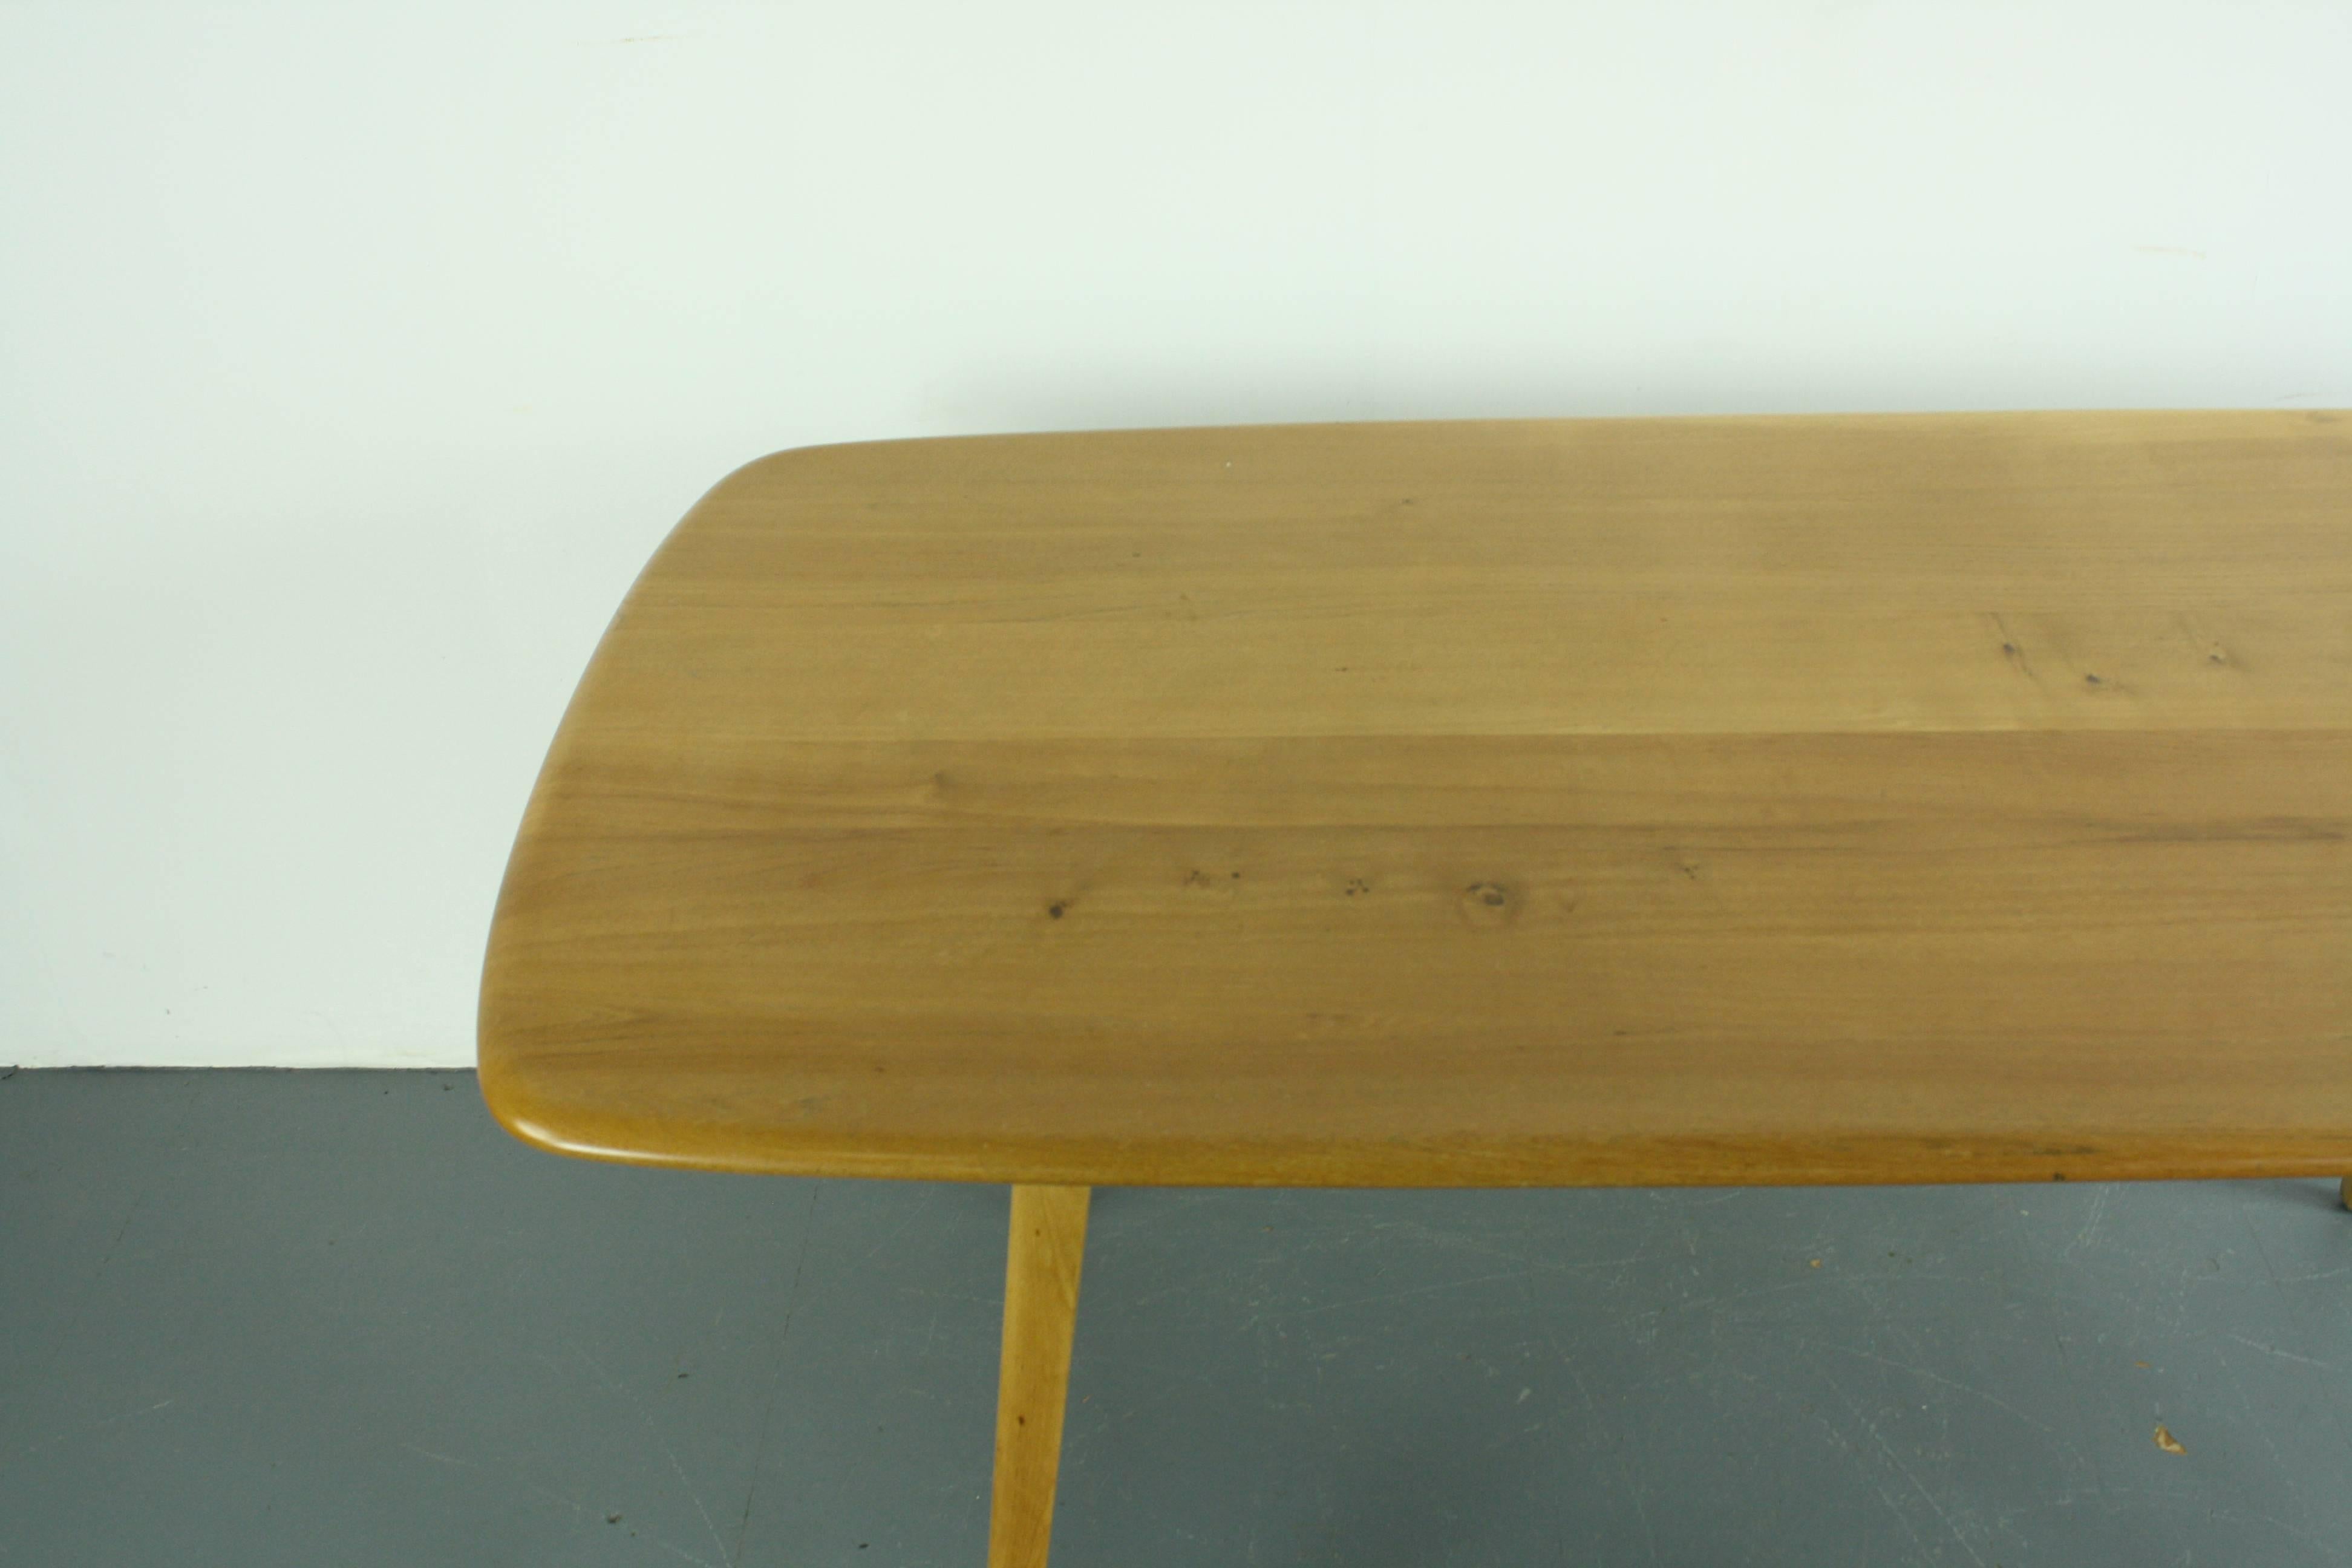 Vintage Midcentury British Ercol Plank Dining Table In Good Condition For Sale In Lewes, East Sussex